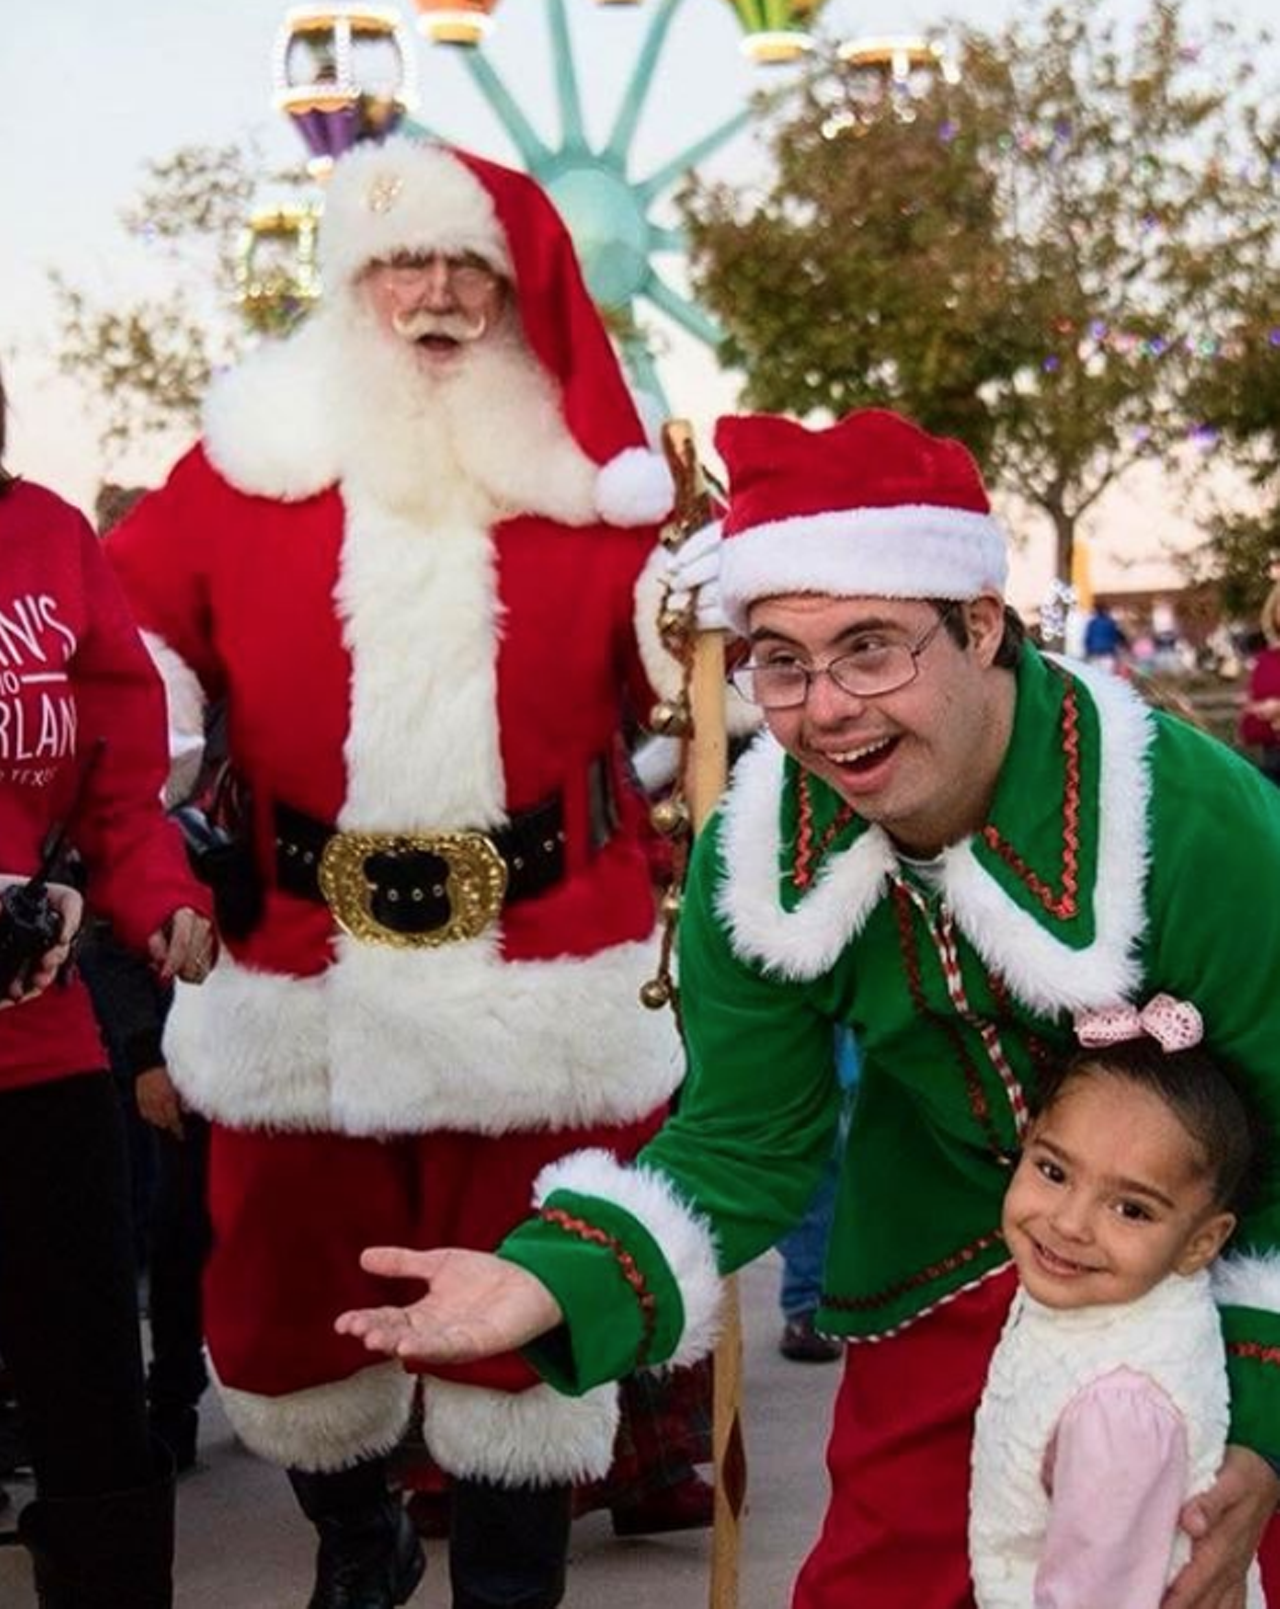 Morgan’s Wonderland
5223 David Edwards Drive, morganswonderland.com
Head on over to the most inclusive park in Texas for a day of seasonal fun. Over in Sensory Village you’ll see an illuminated Christmas tree and other twinkling lights, plus a simulated ice rink! You’ll also be able to score complimentary hot chocolate and cookies.
Photo via Instagram / morganswonderlandtexas